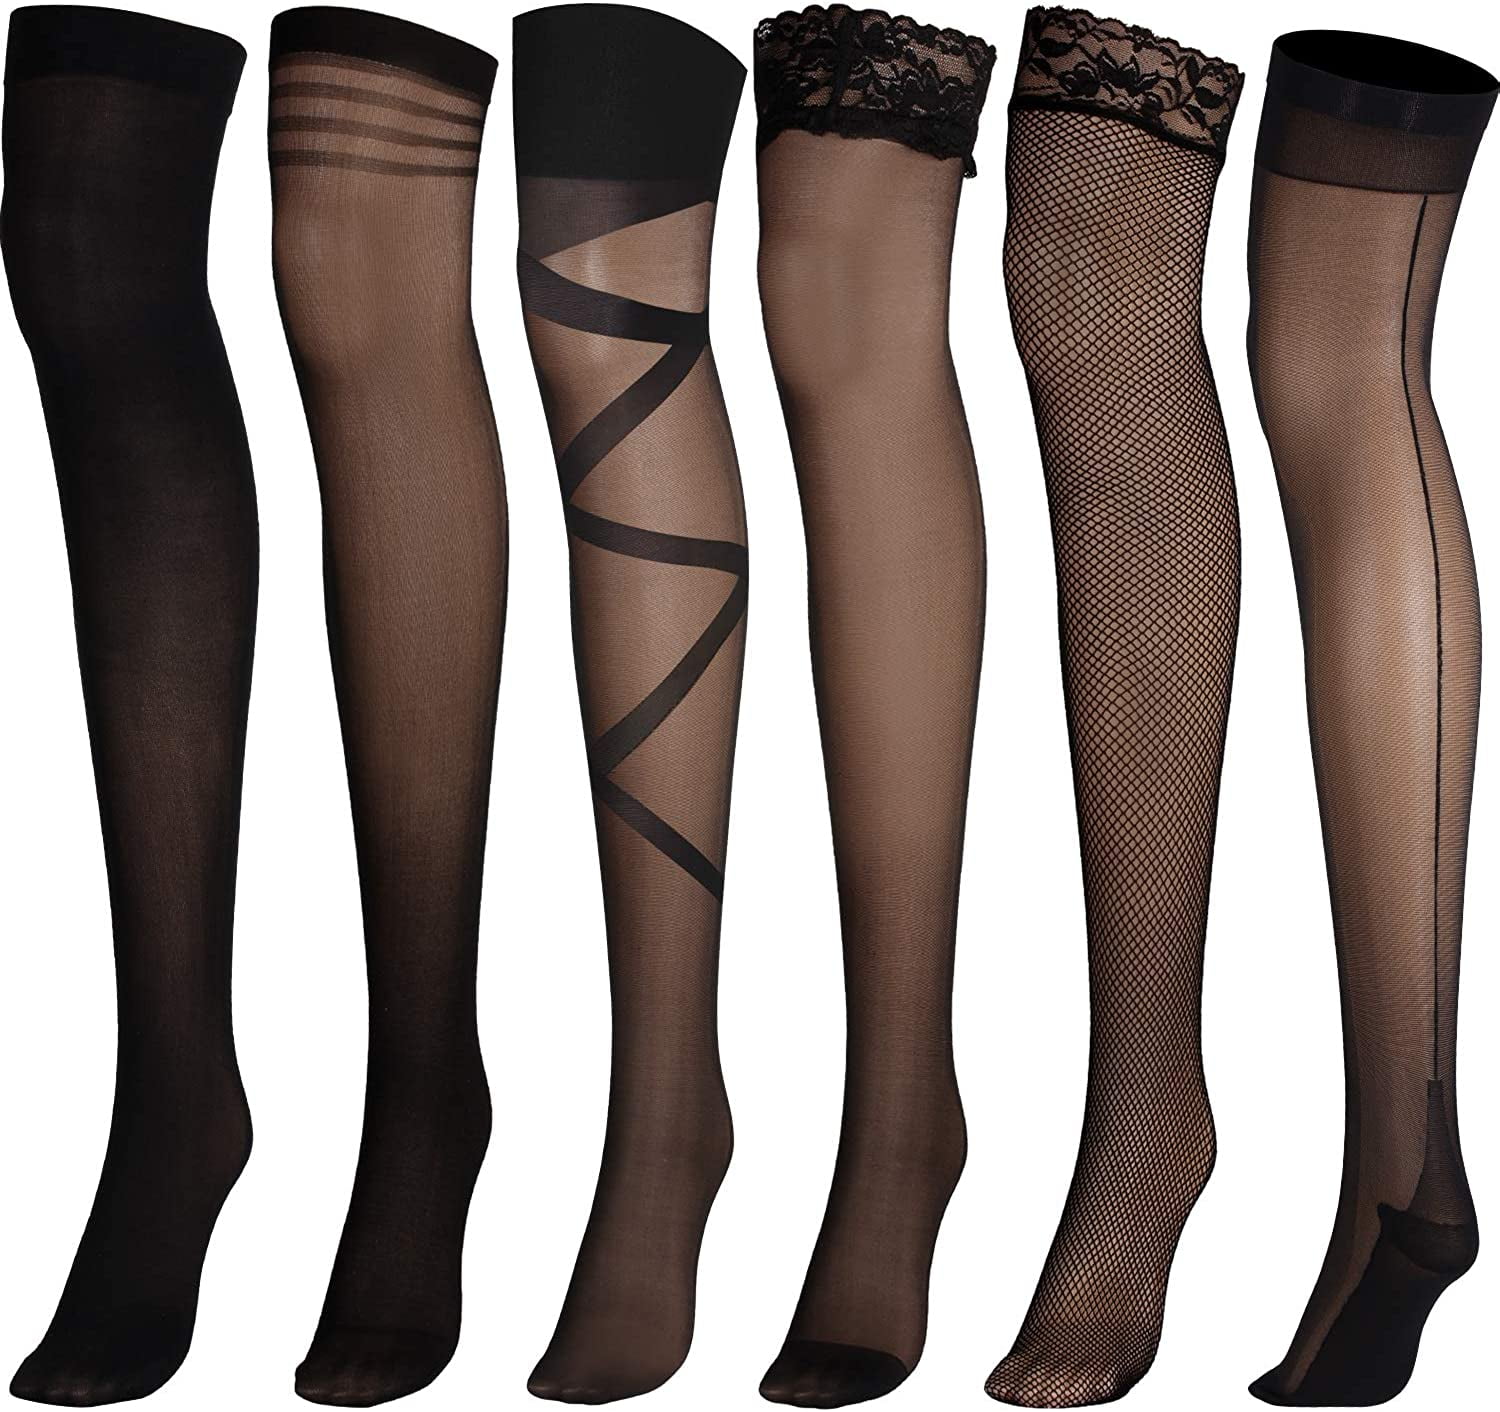 6 Pairs Thigh High Stocking Fishnet Stockings Silicone Lace Top Back Seam Strap Women 